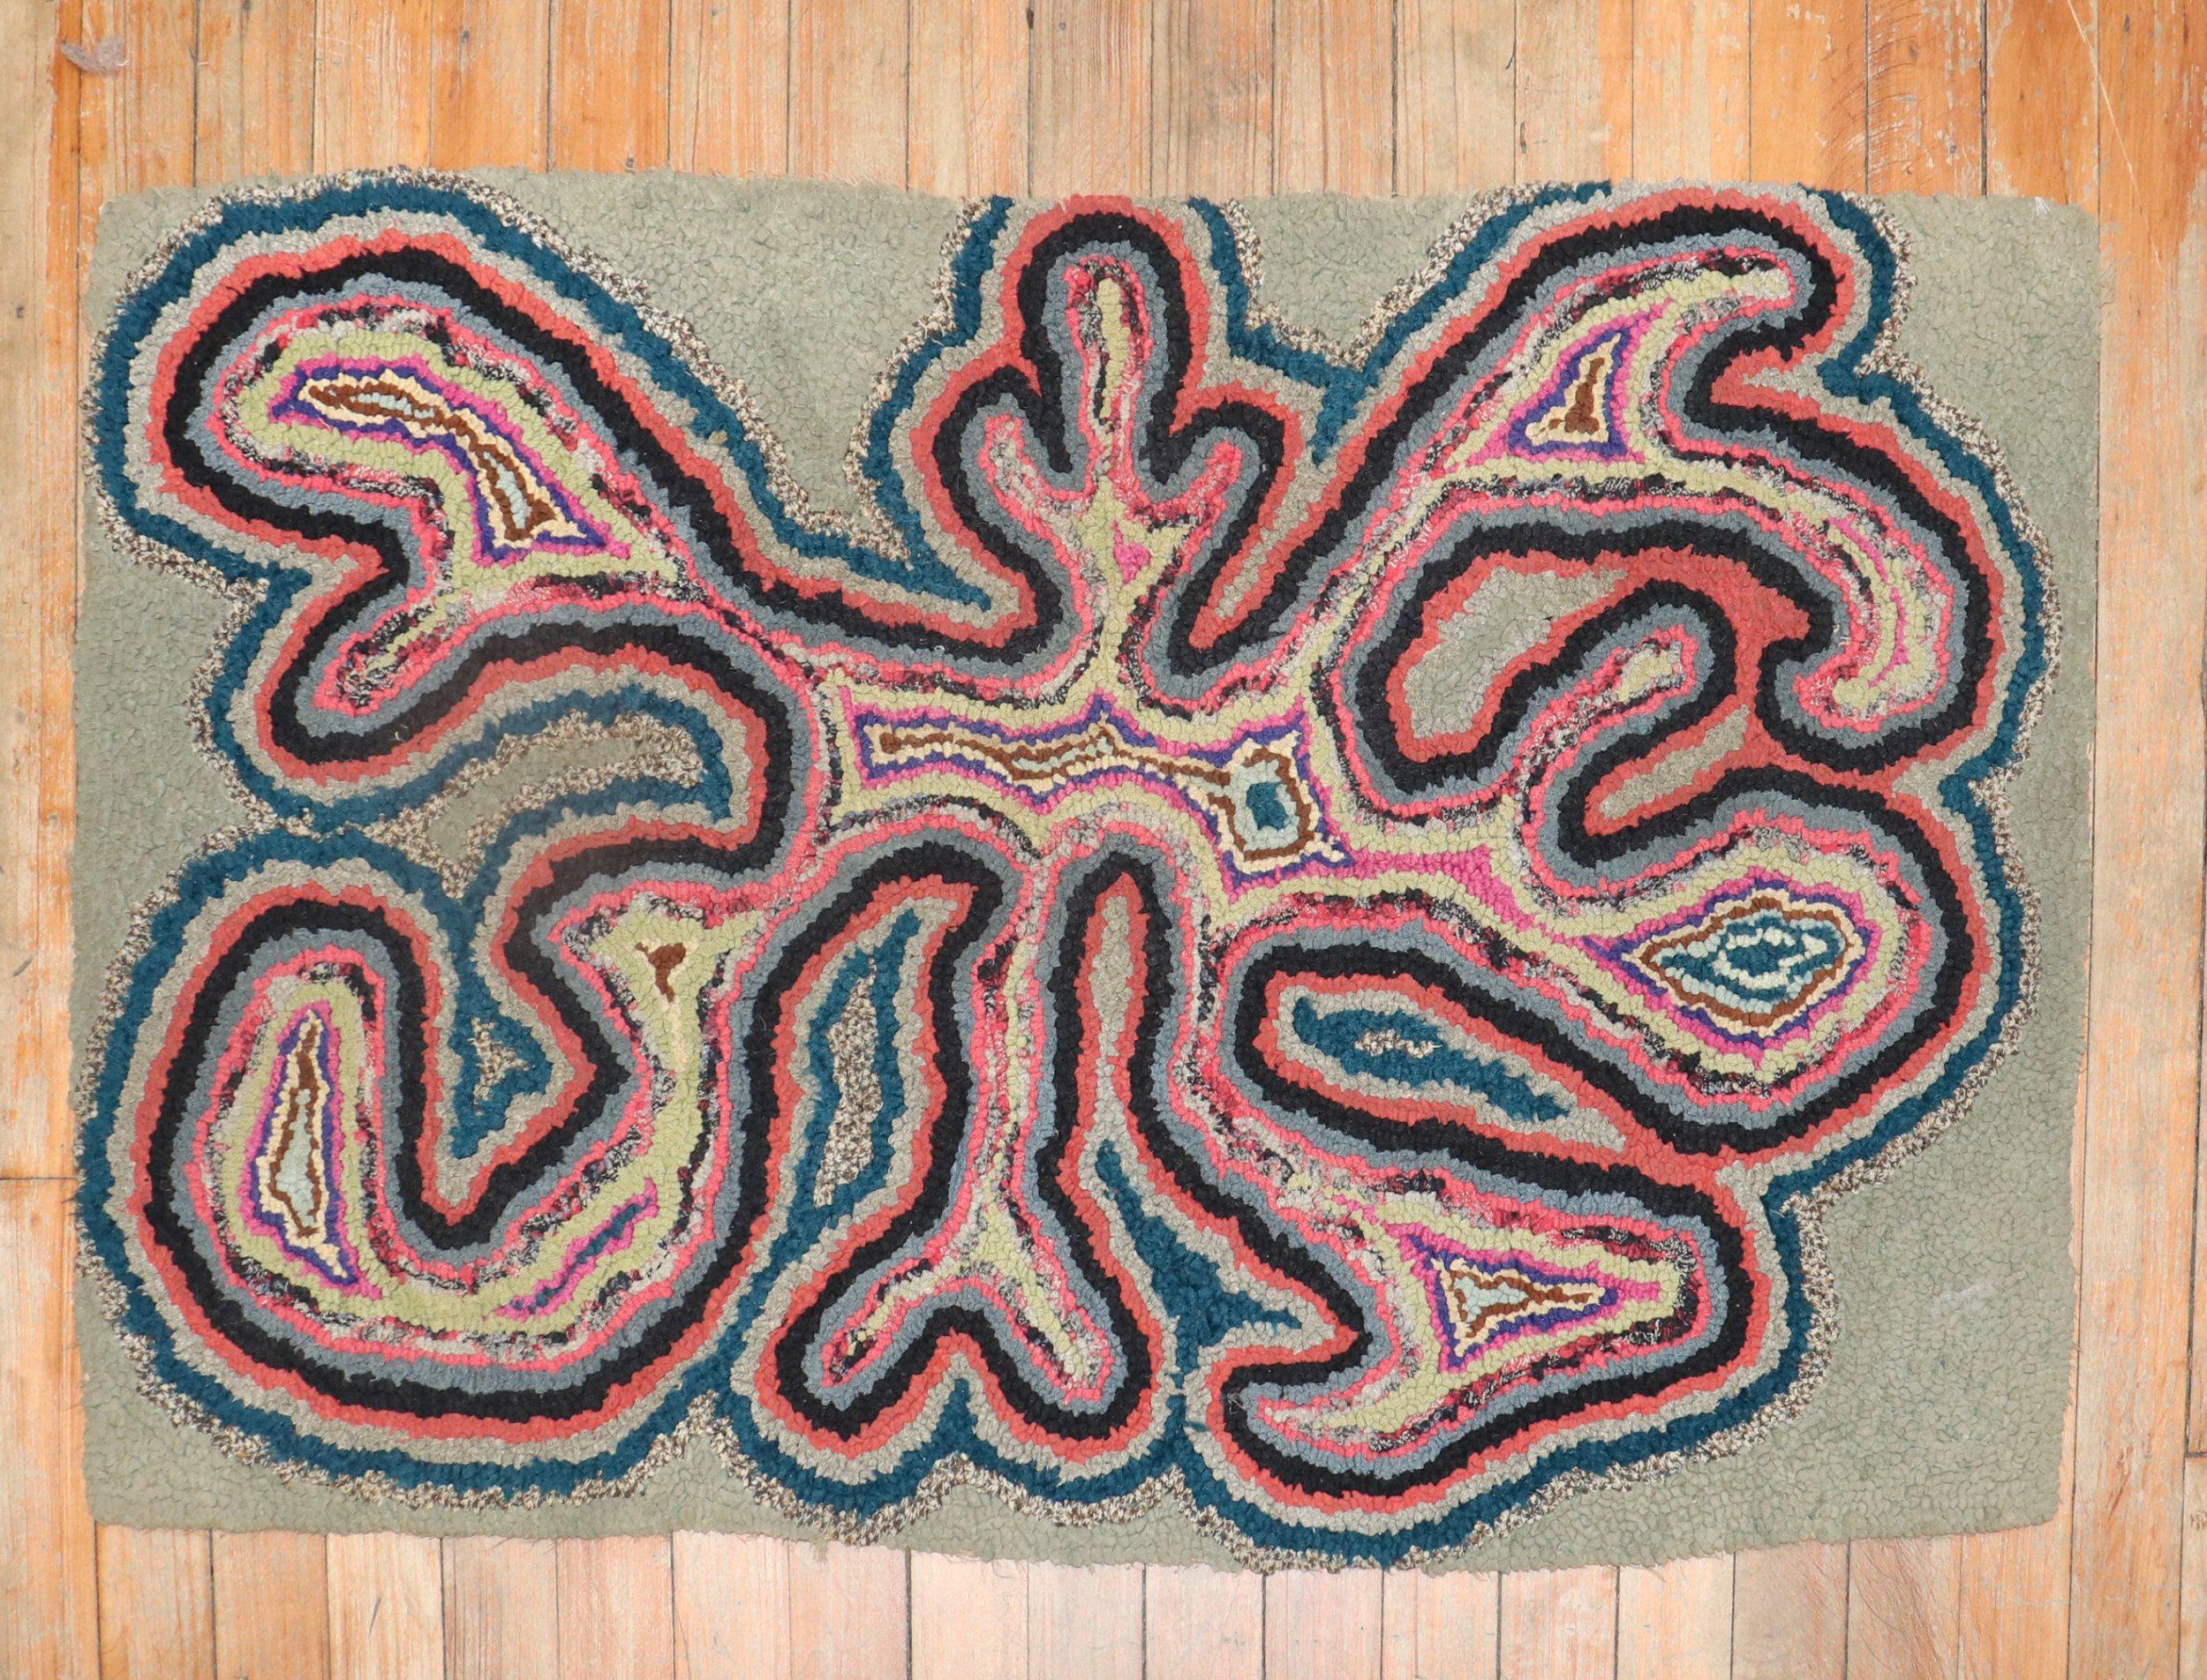 An American Hooked rug from the 3rd quarter of the 20th century with an eclectic design

Measures: 2' x 3'2''.

 